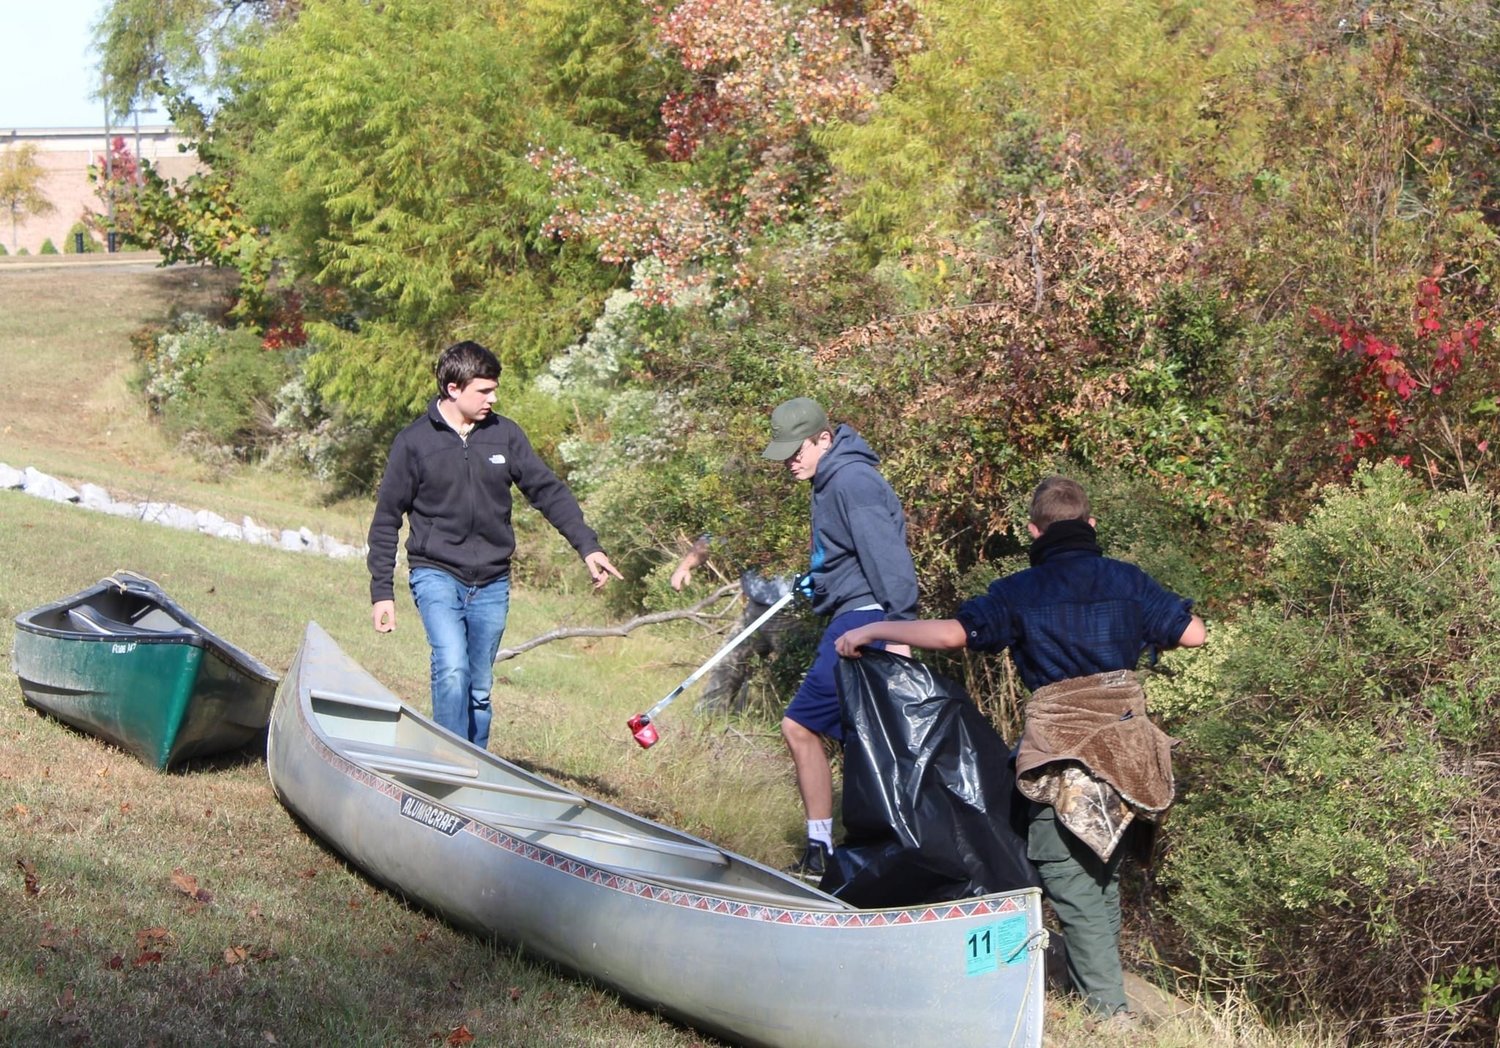 Scouts from Troop 15 in Madison used canoes to clean up Brashear Creek.